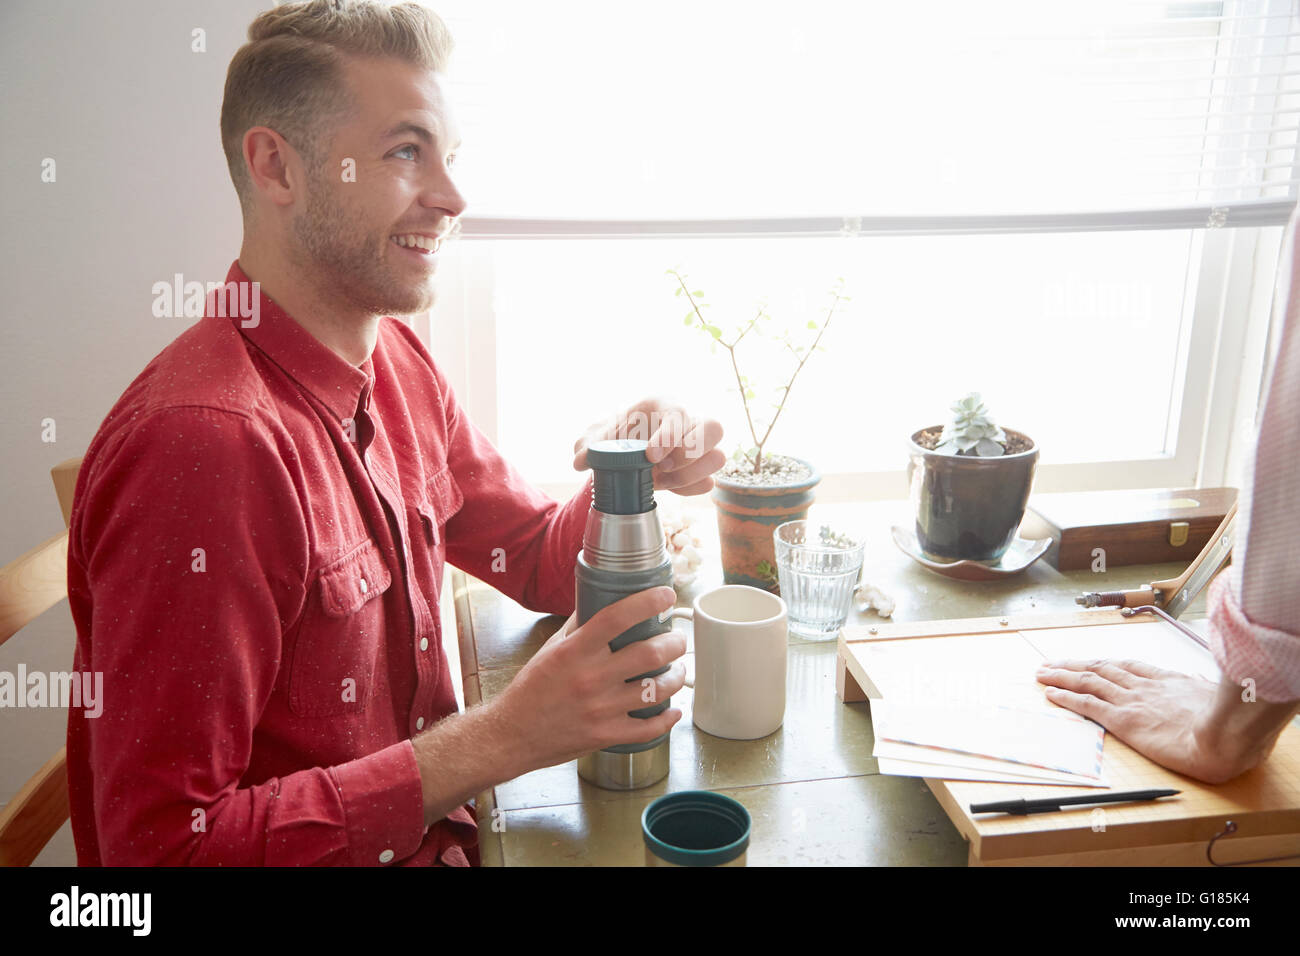 Side view of man sitting at table holding flask smiling Stock Photo